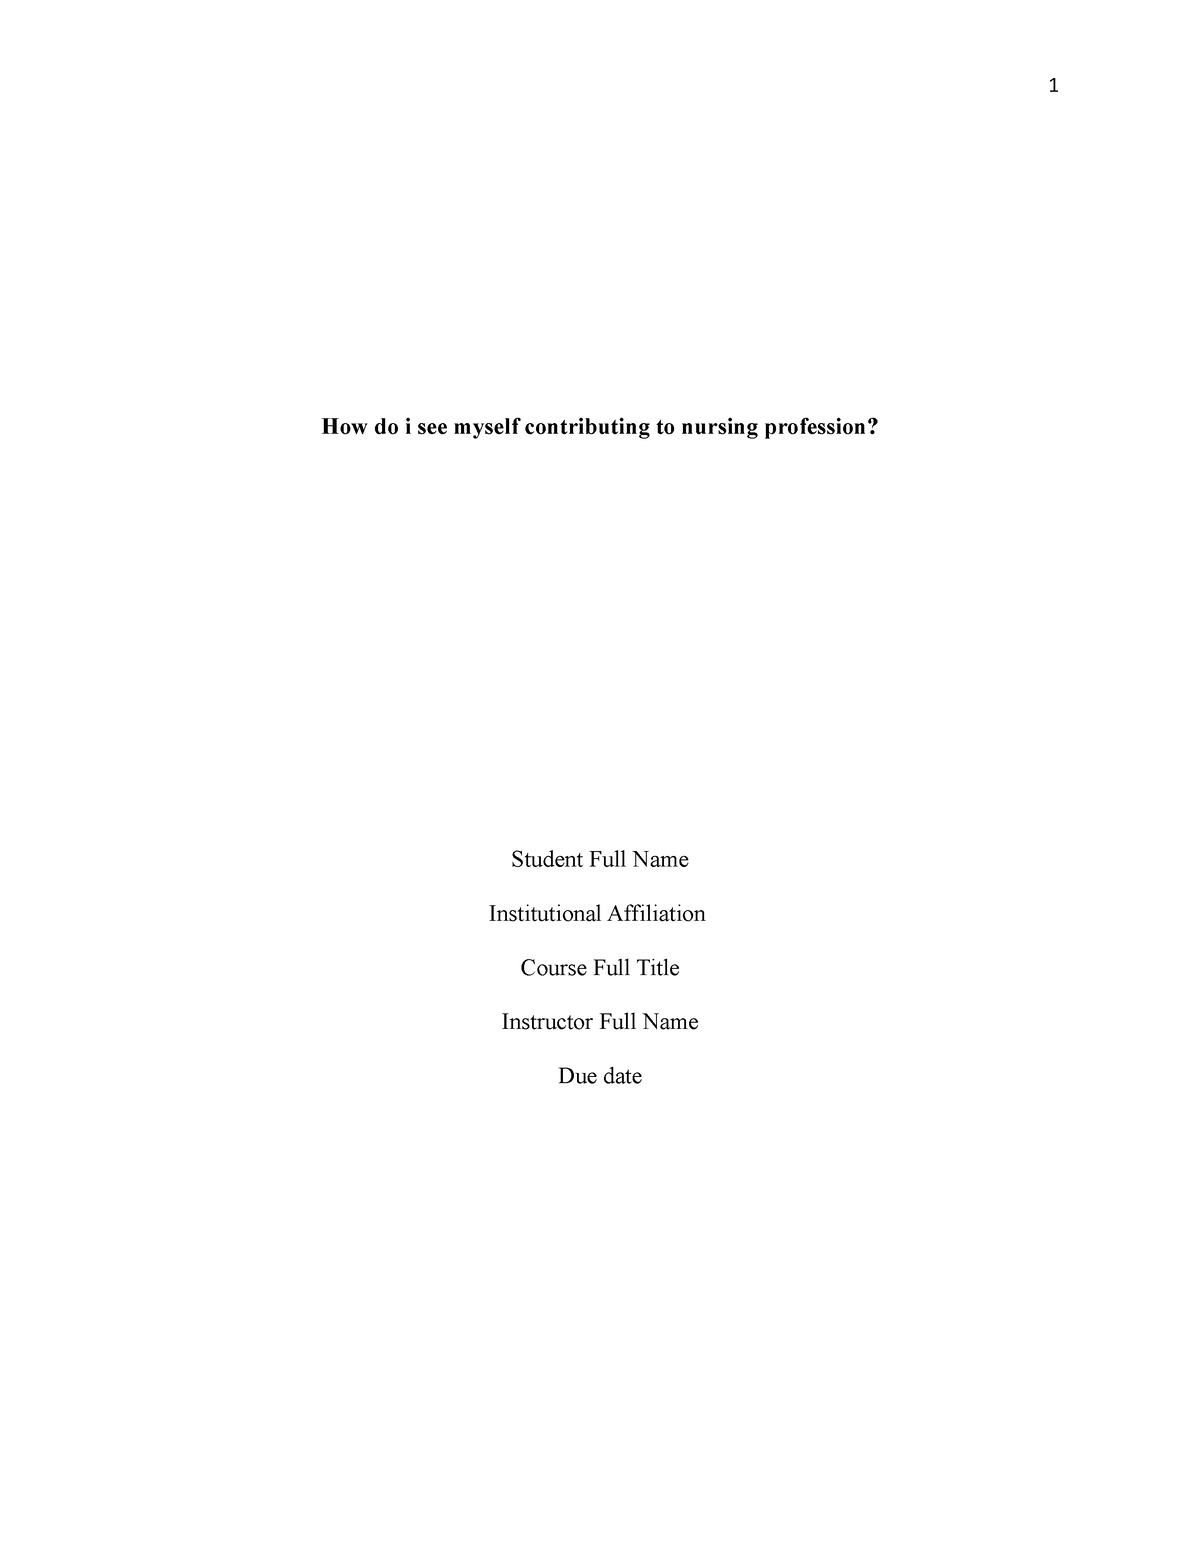 order-1505292-nursing-essay-how-do-i-see-myself-contributing-to